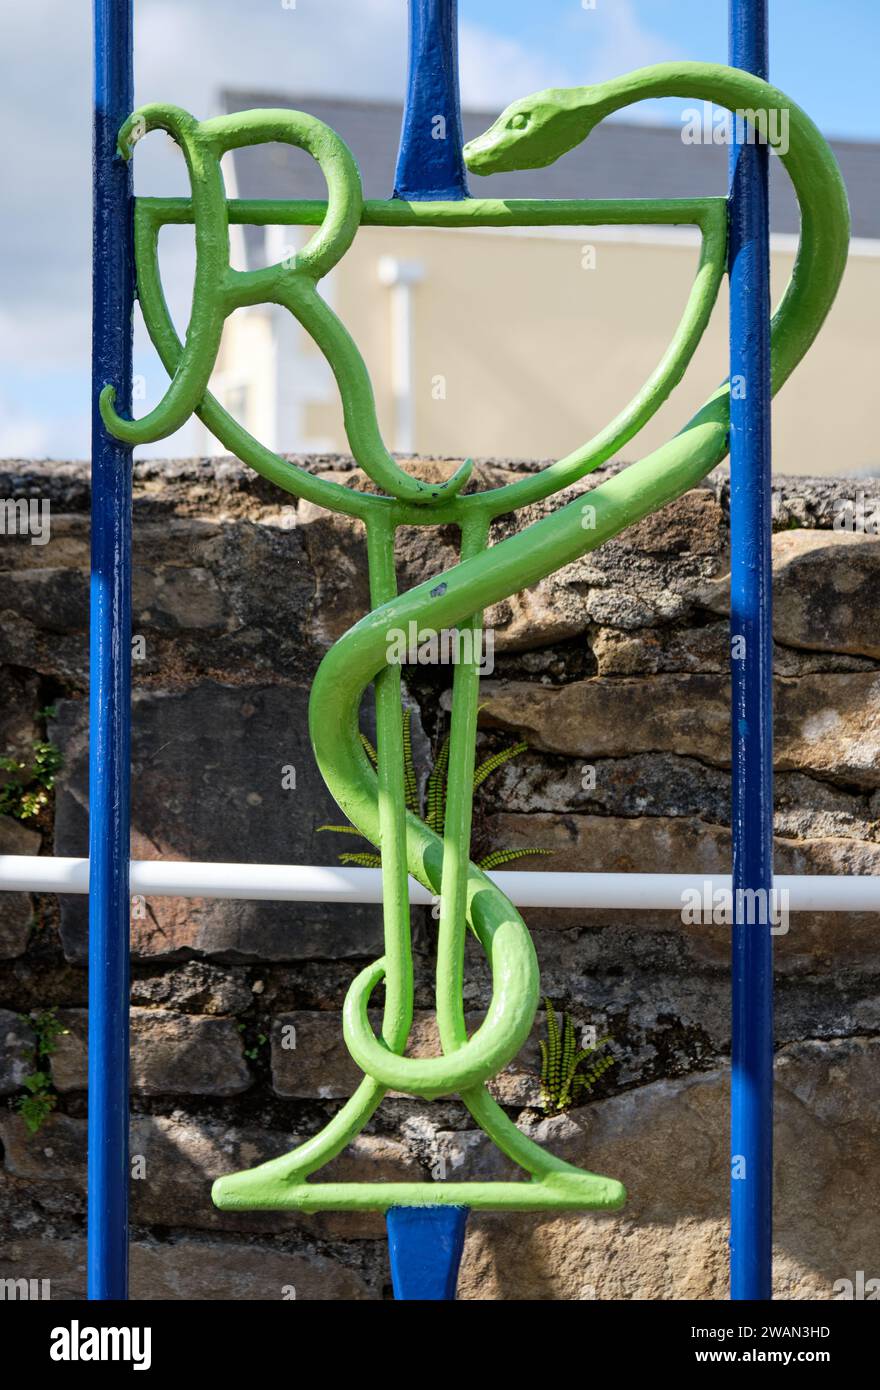 Pharmacist logo with snake and glass made in wrought iron fence at entrance Stock Photo